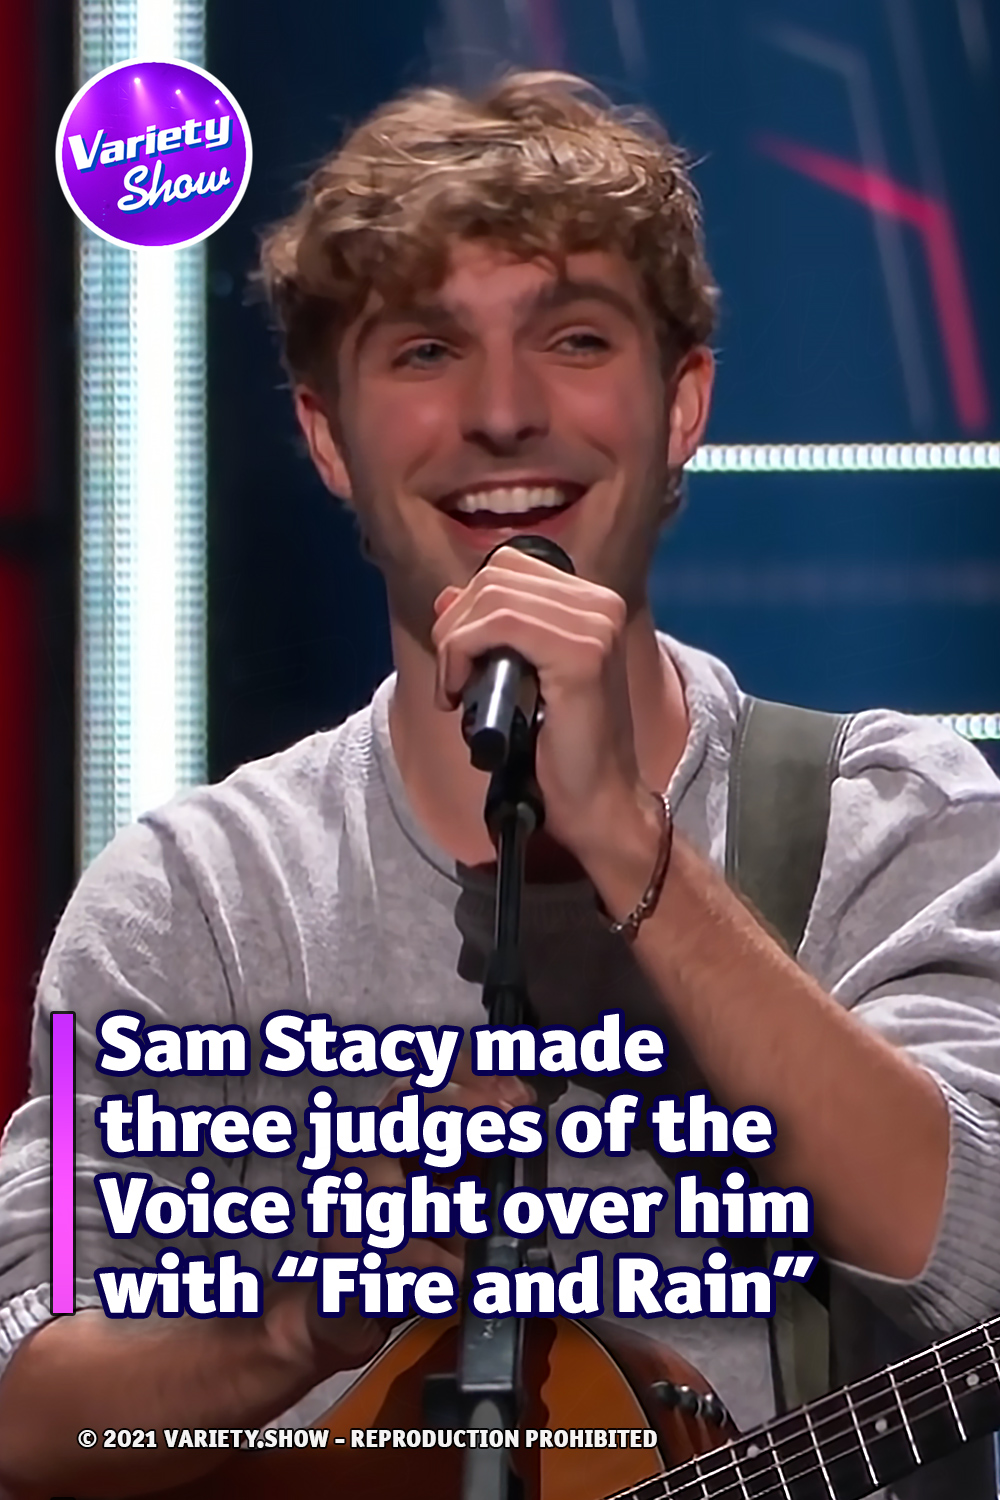 Sam Stacy made three judges of the Voice fight over him with “Fire and Rain”